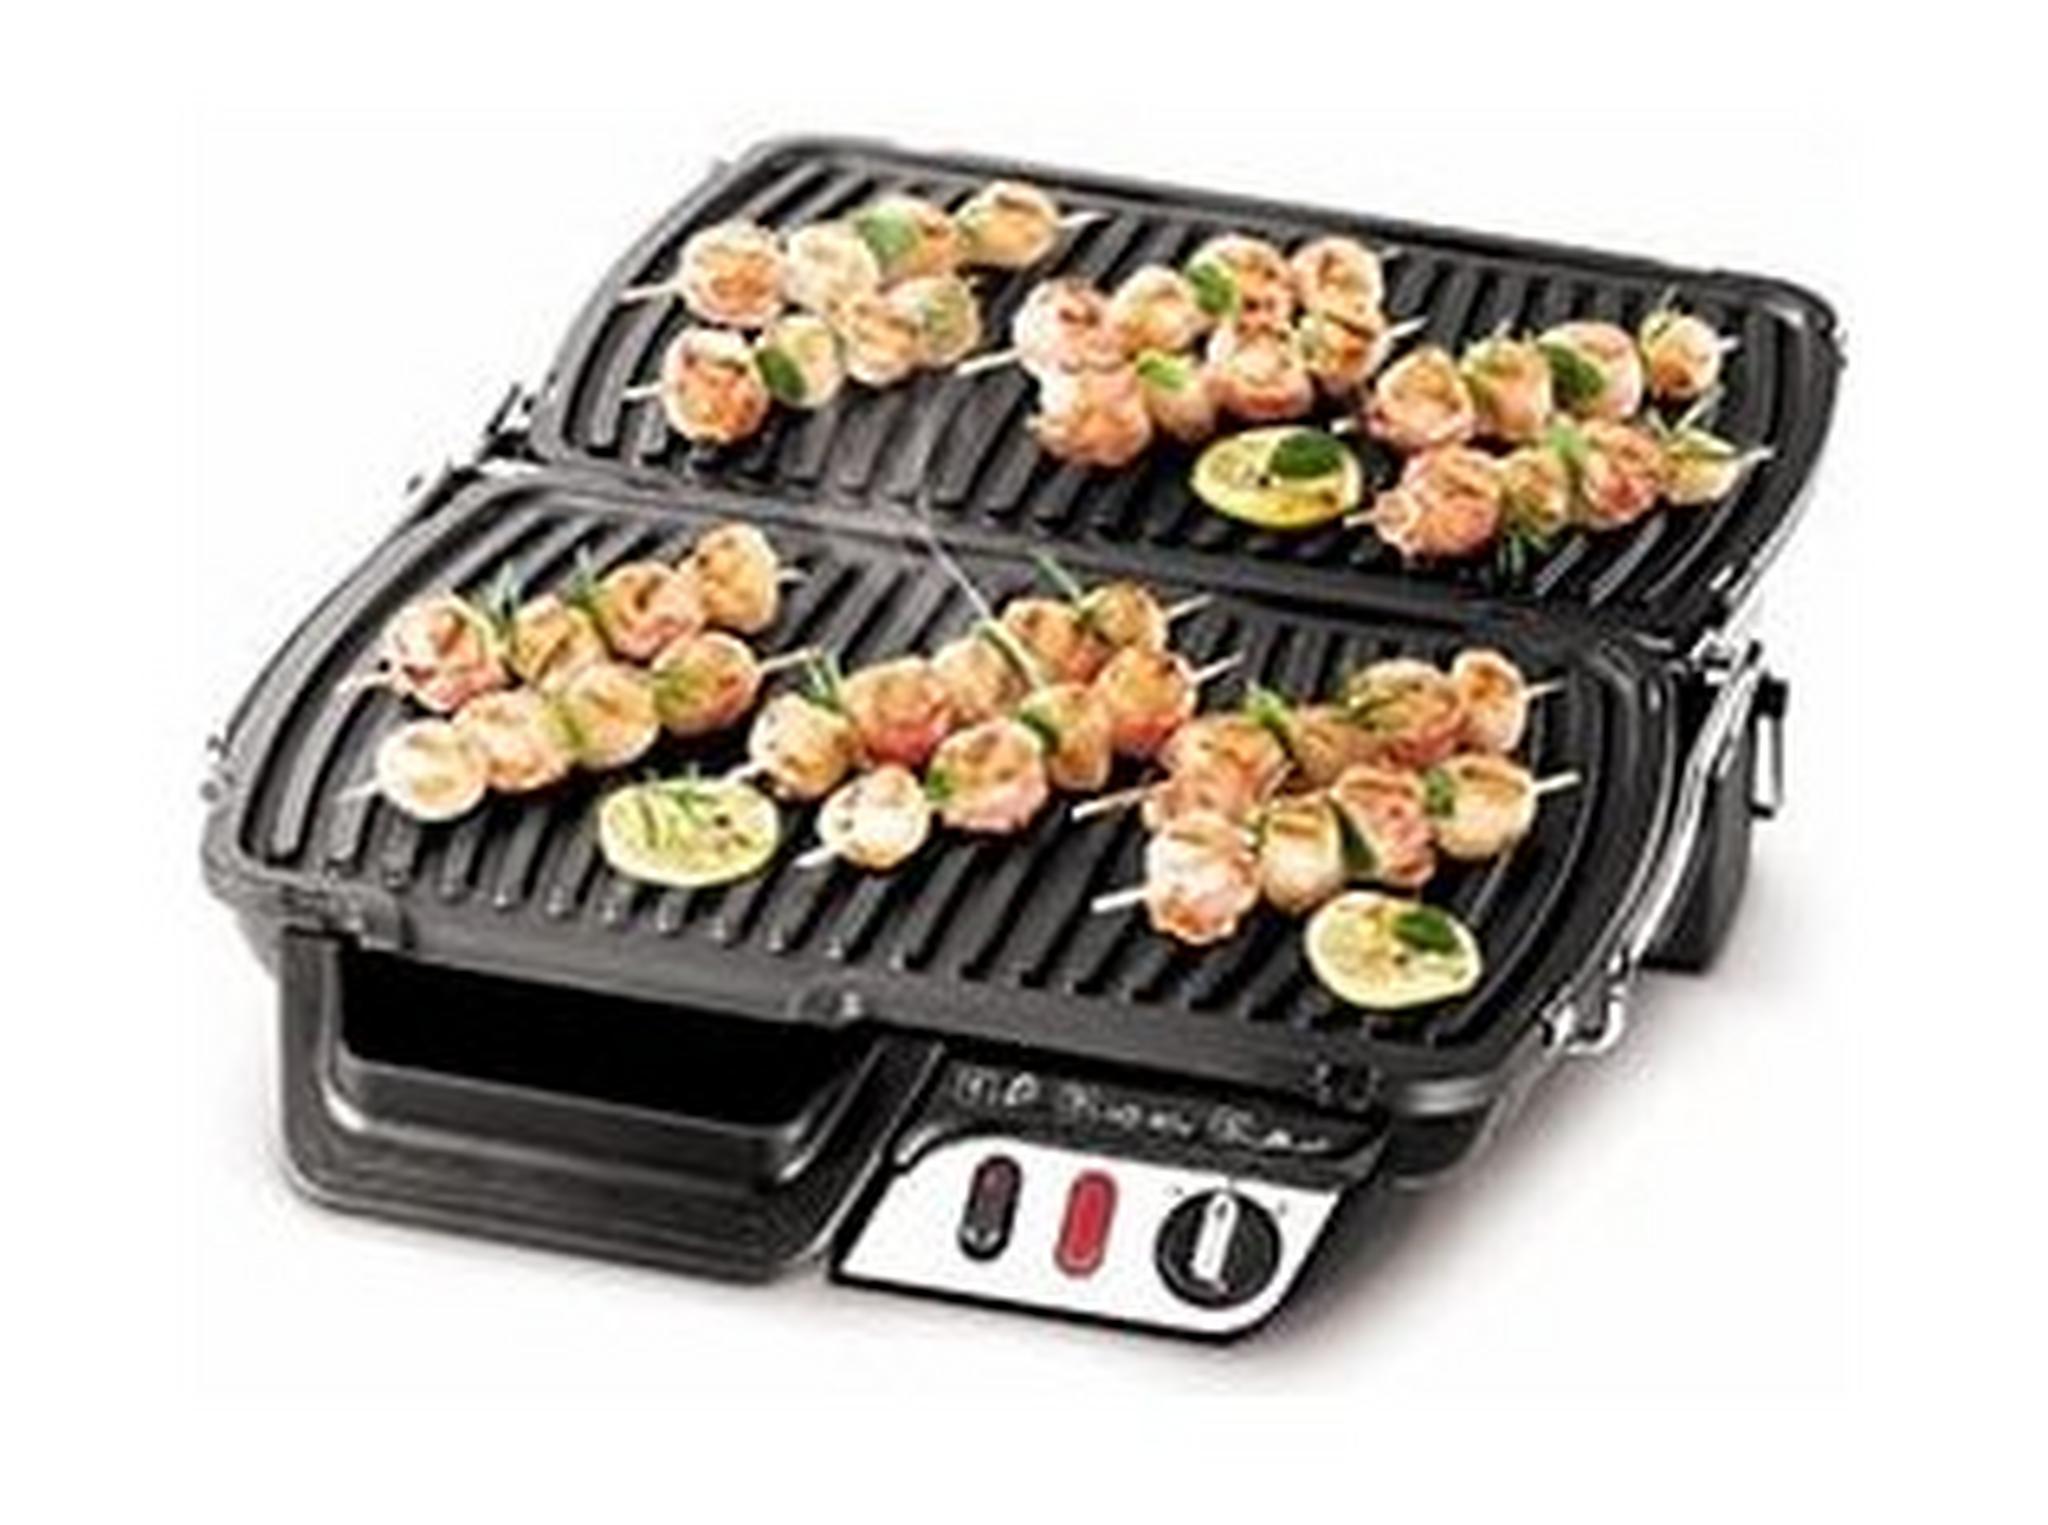 Tefal Ultra Compact Grill - 2000W (GC306028) Black